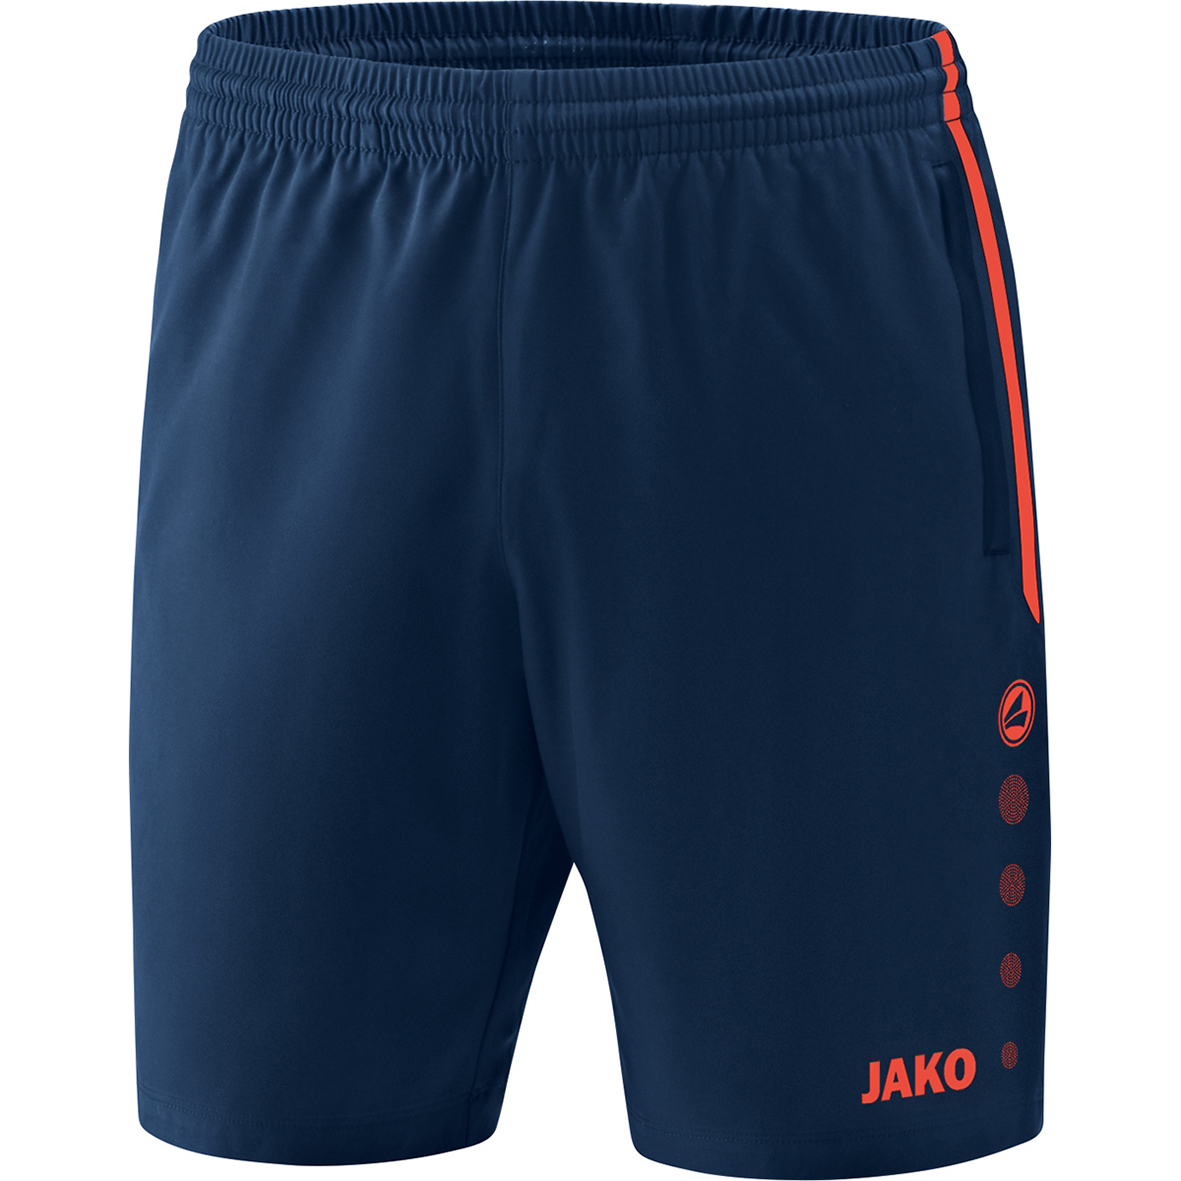 SHORTS JAKO COMPETITION 2.0, NAVY-FLAME KIDS.